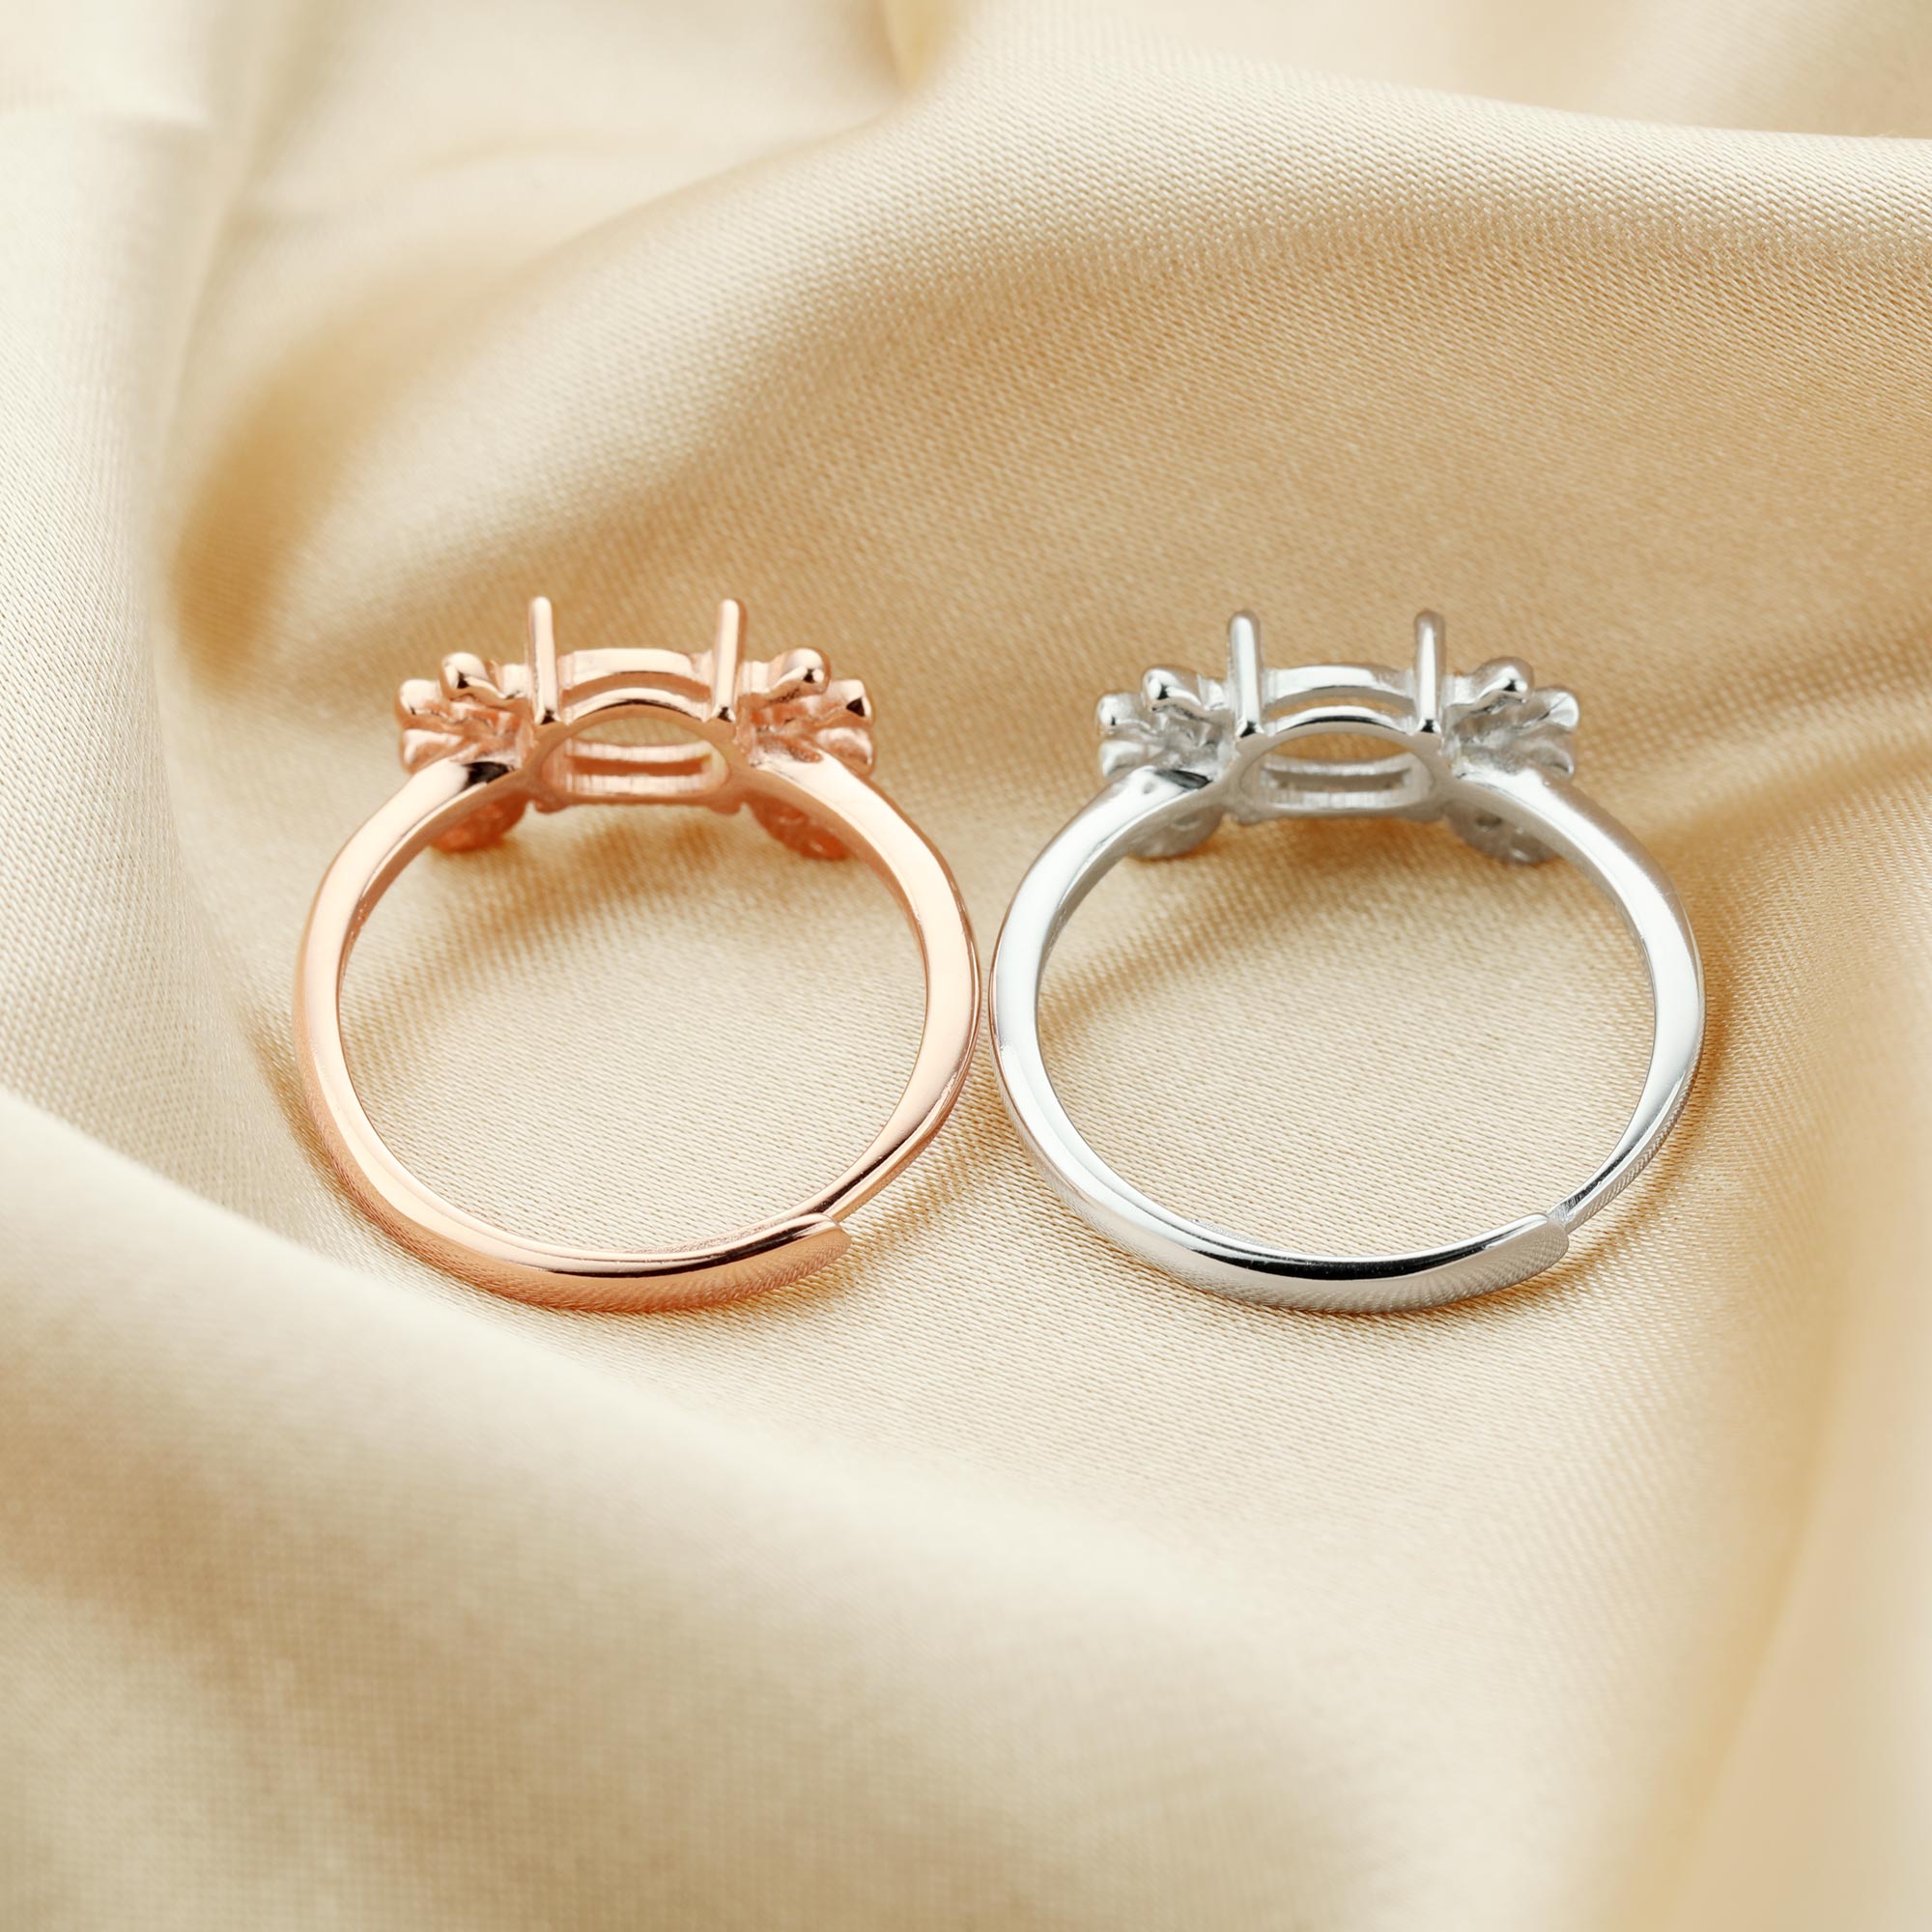 5x7mm Oval Prongs Ring Settings,Animal Crab Solid 925 Sterling Silver Rose Gold Plated Ring,DIY Gemstone Supplies 1294490 - Click Image to Close